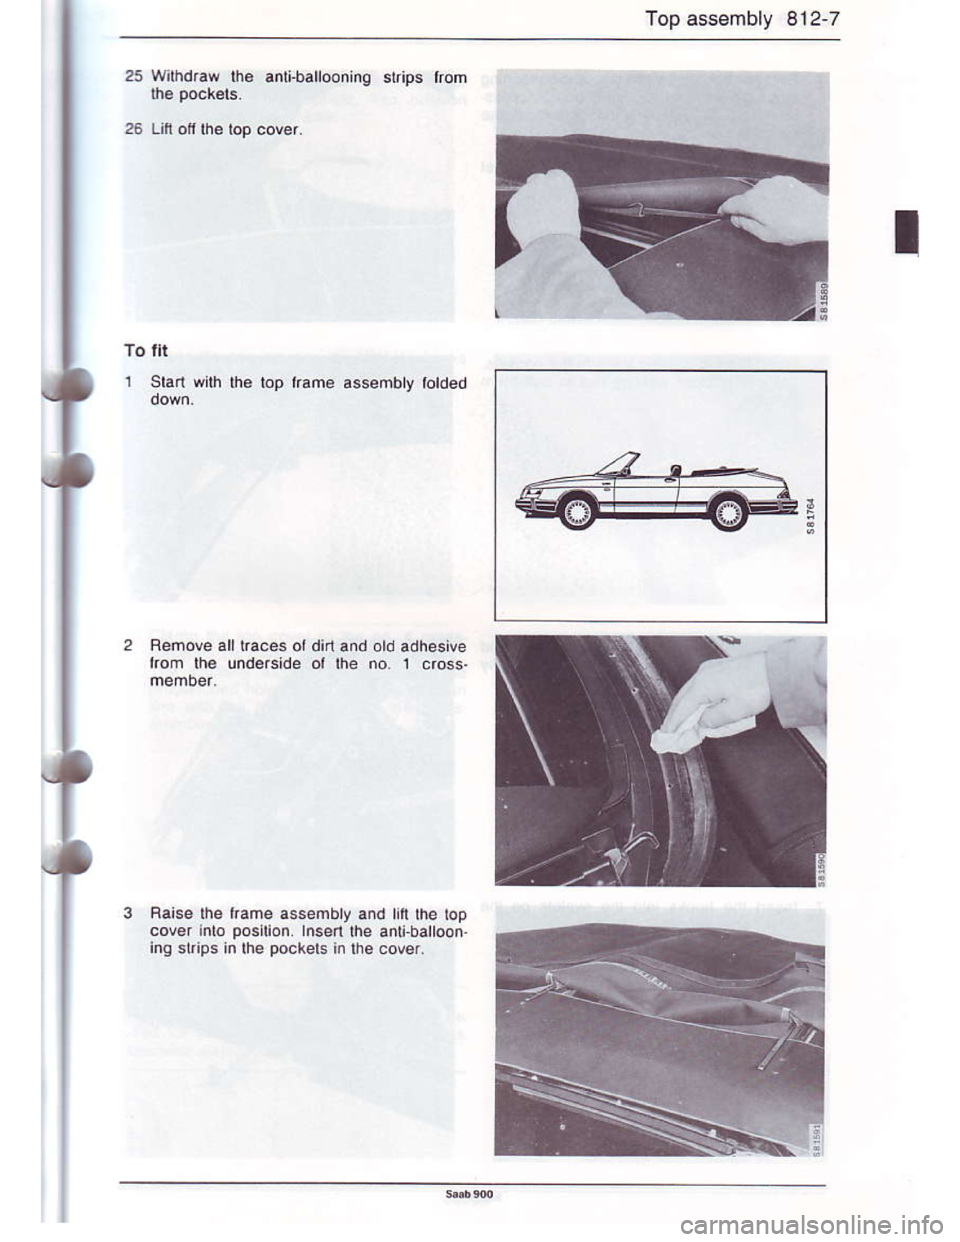 SAAB 900 1986 Owners Guide Downloaded from www.Manualslib.com manuals search engine Top assembly 812-7
Wilhdraw tho anli-baliooninq slrips lrom
To fli
1 9an with rhe rop lrame .ssembty totded
Faise lhe kame ass€mbly and [n lh